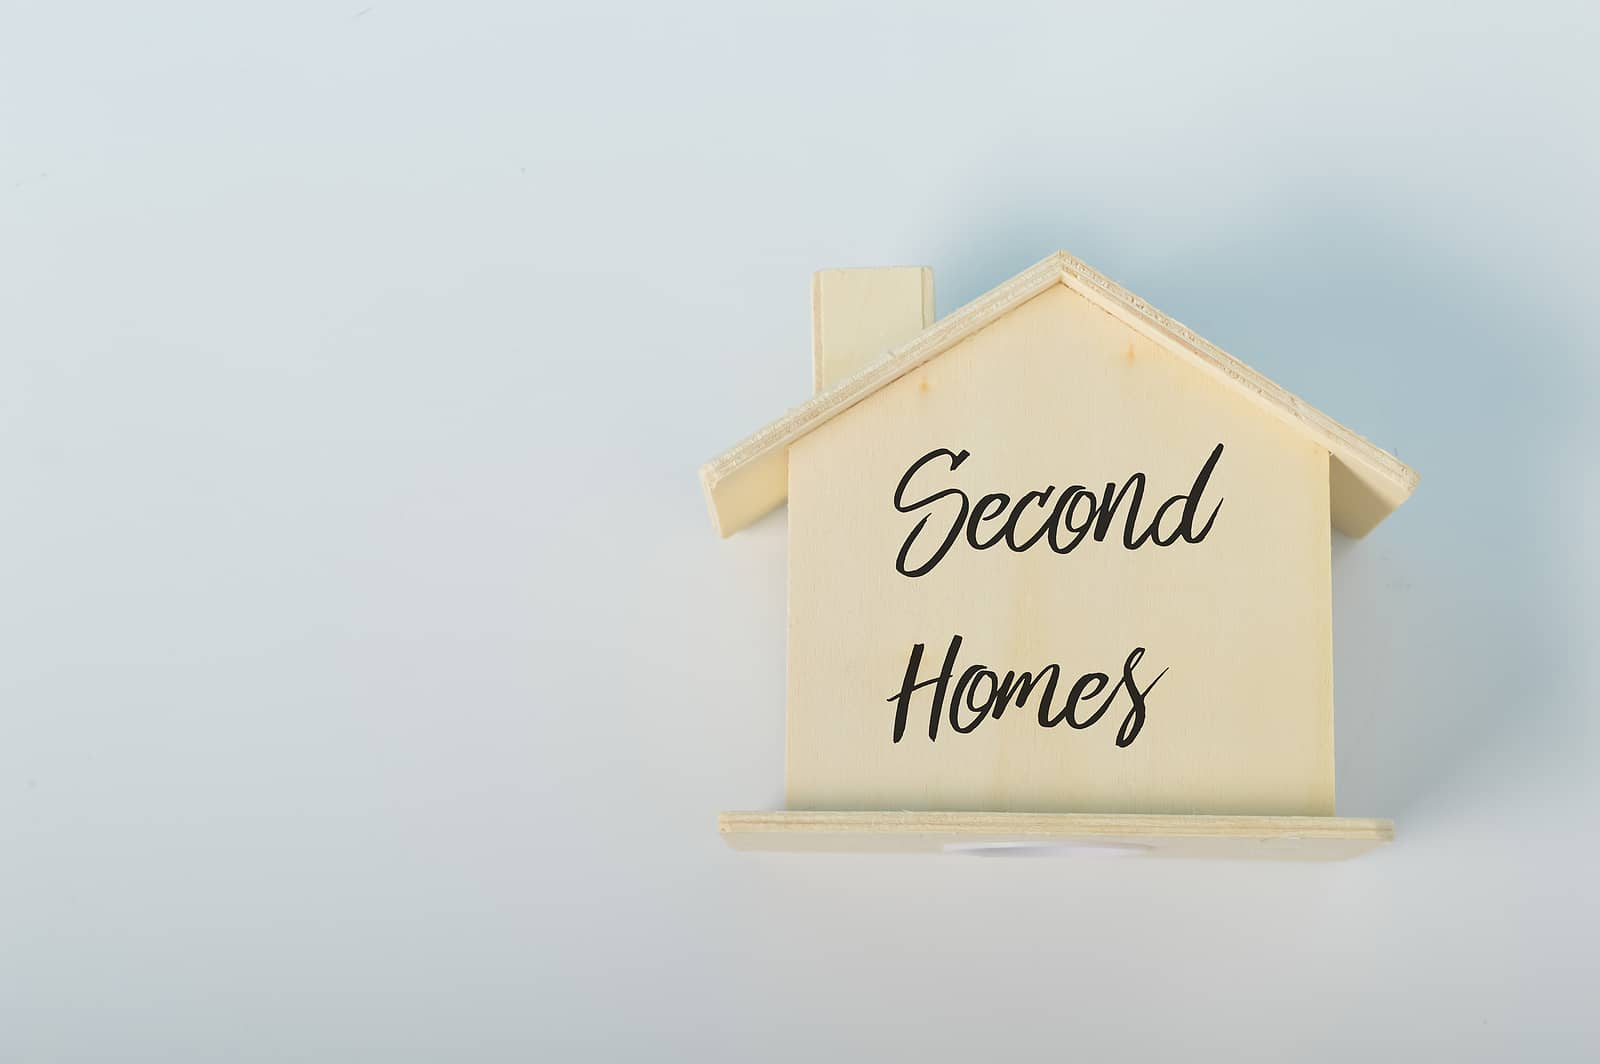 How To Get Homeowners Insurance for a Second Home